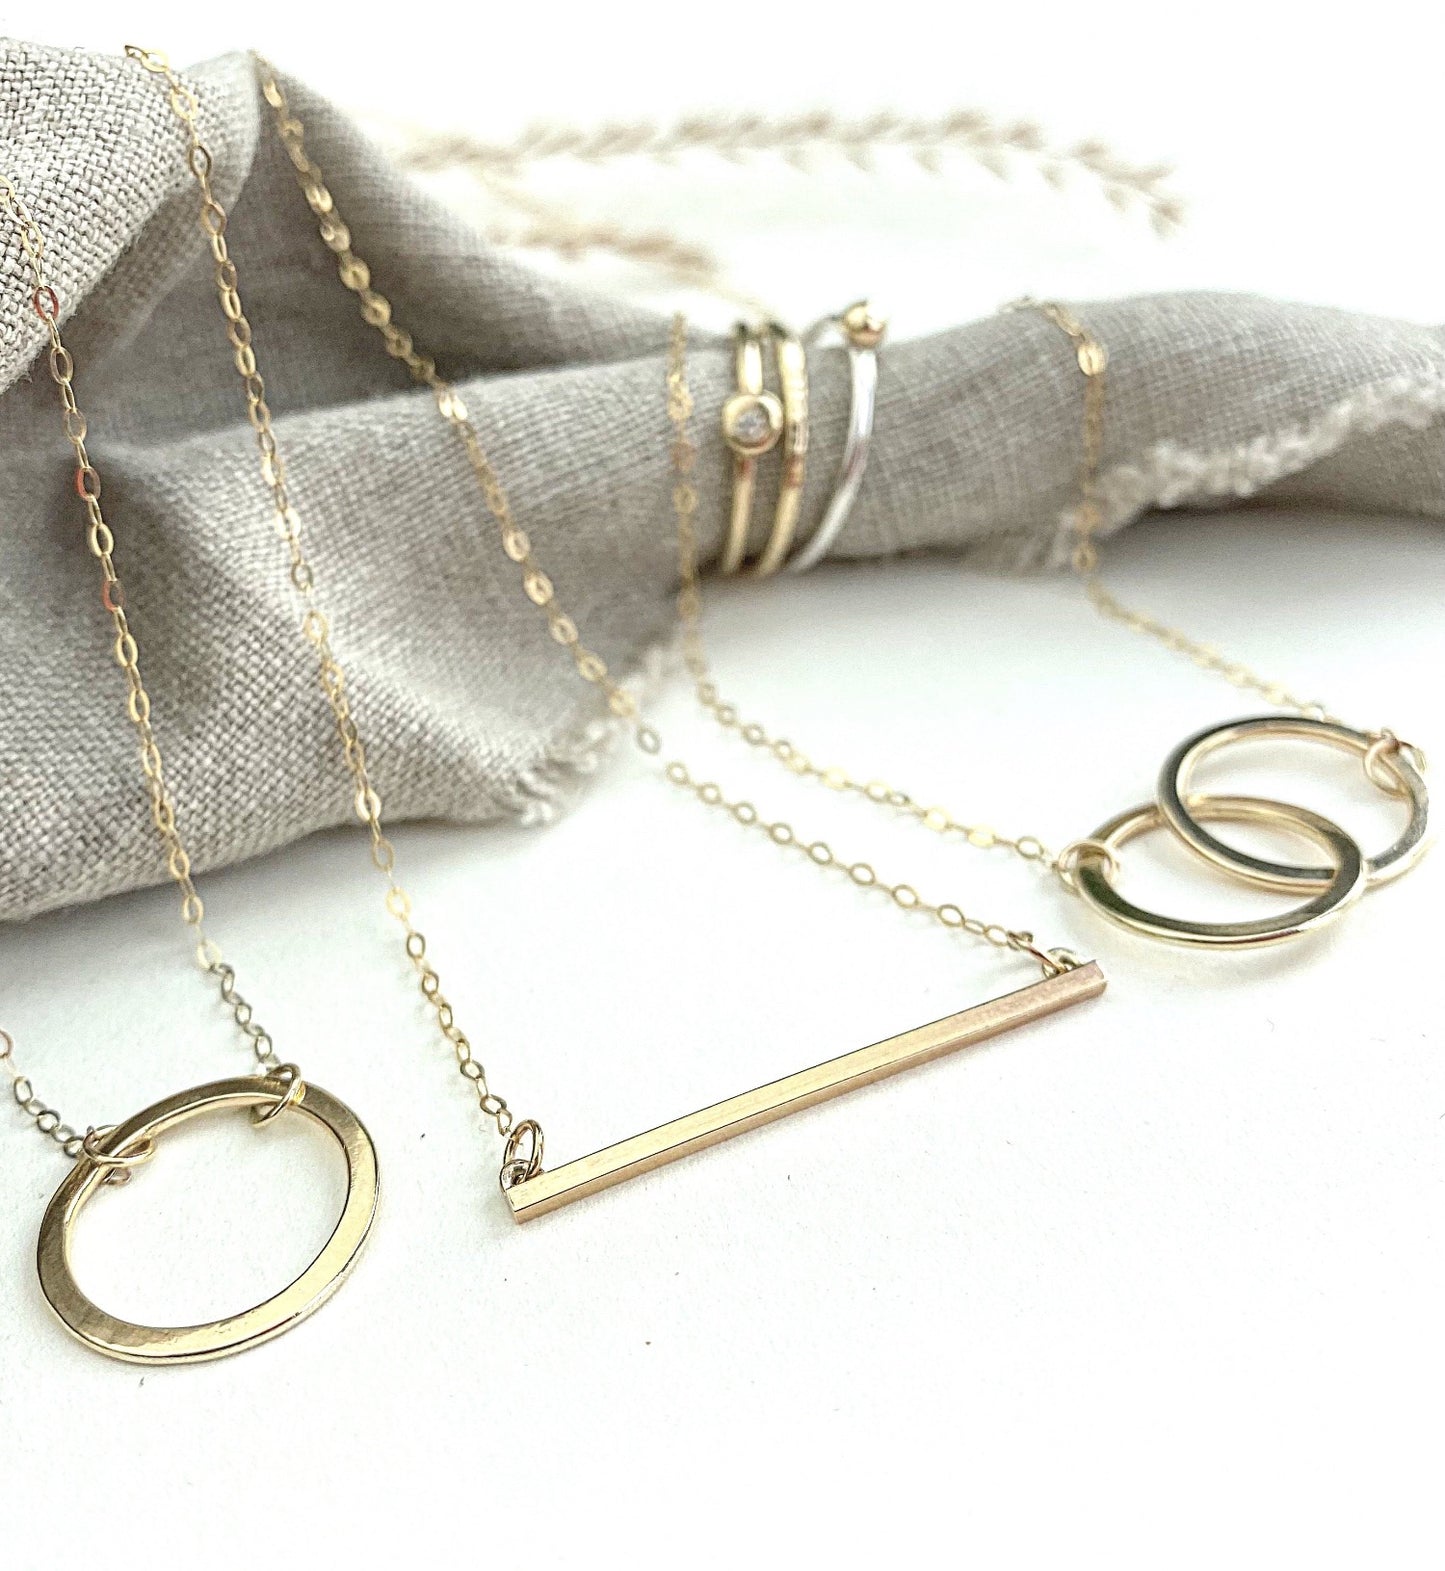 The 9ct Gold Helm Personalised Necklace - 9ct gold hoop pendant